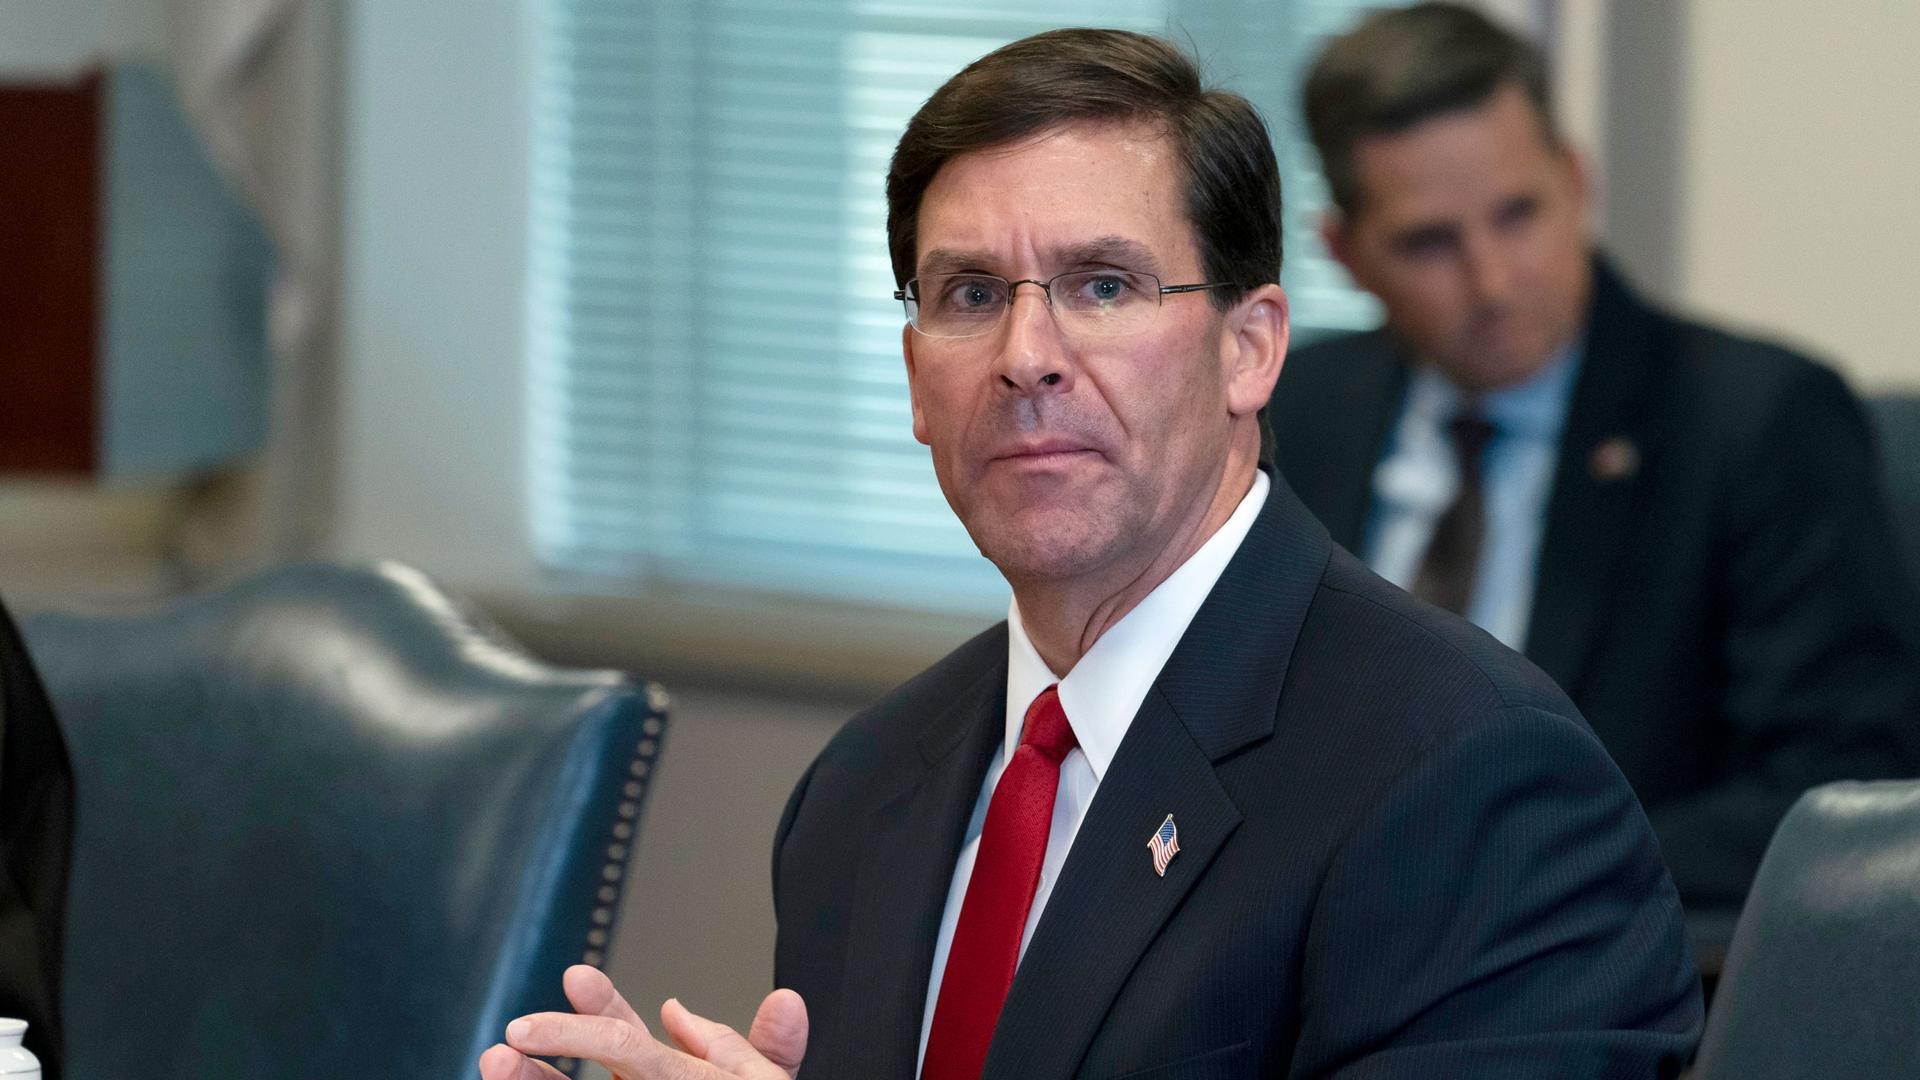 Secretary of Defense Mark Esper is shown seated a table with his hands clasped.